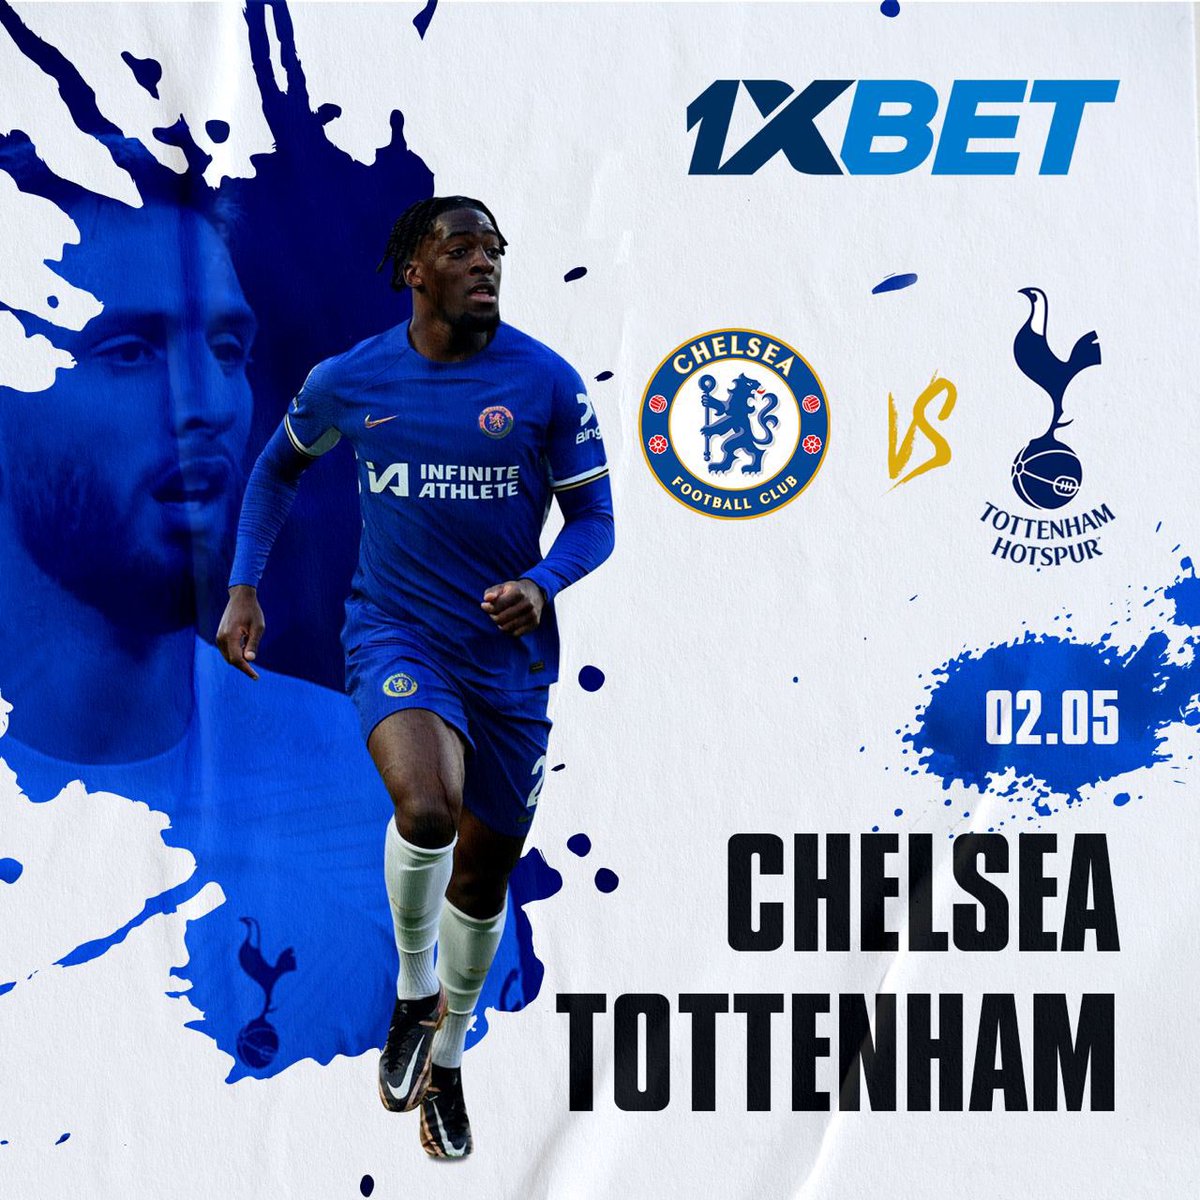 CHELSEA VS TOTTENHAM tonight!! Place your bet on your favourite team on 1xbet. Sign up tinyurl.com/yc7hck57 and use my promo code 'Vaddict' to get 300% welcome bonus